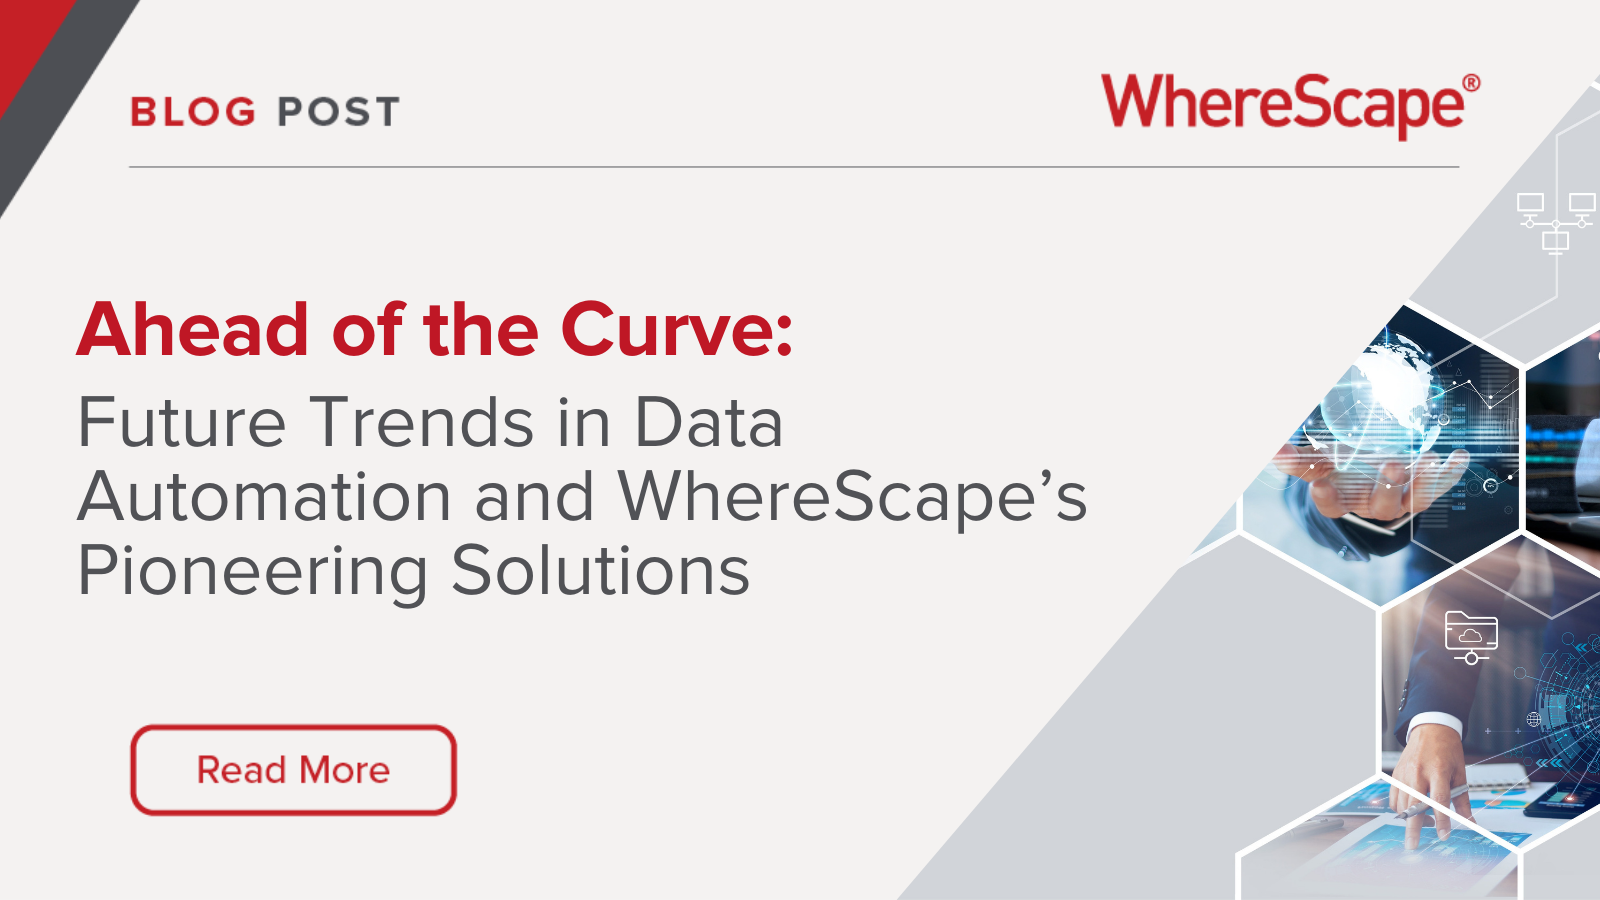 Blog title card for "Ahead of the Curve: Future Trends in Data Automation and WhereScape’s Pioneering Solutions"